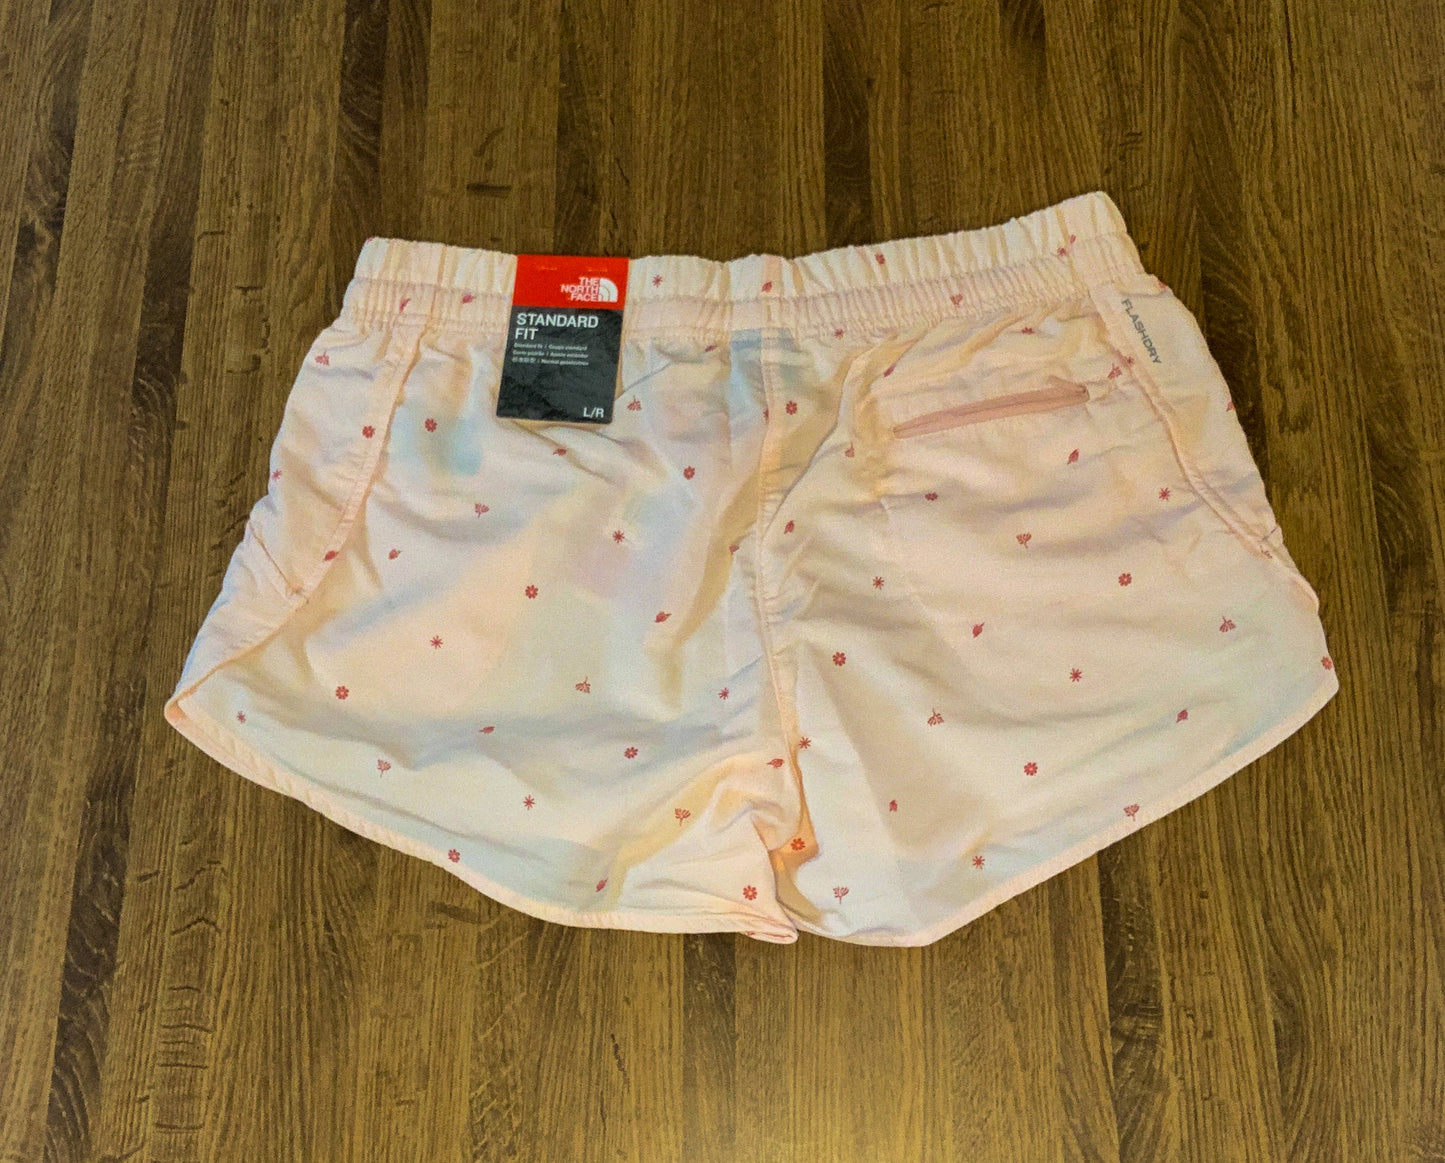 The North Face Women's Class V Shorts